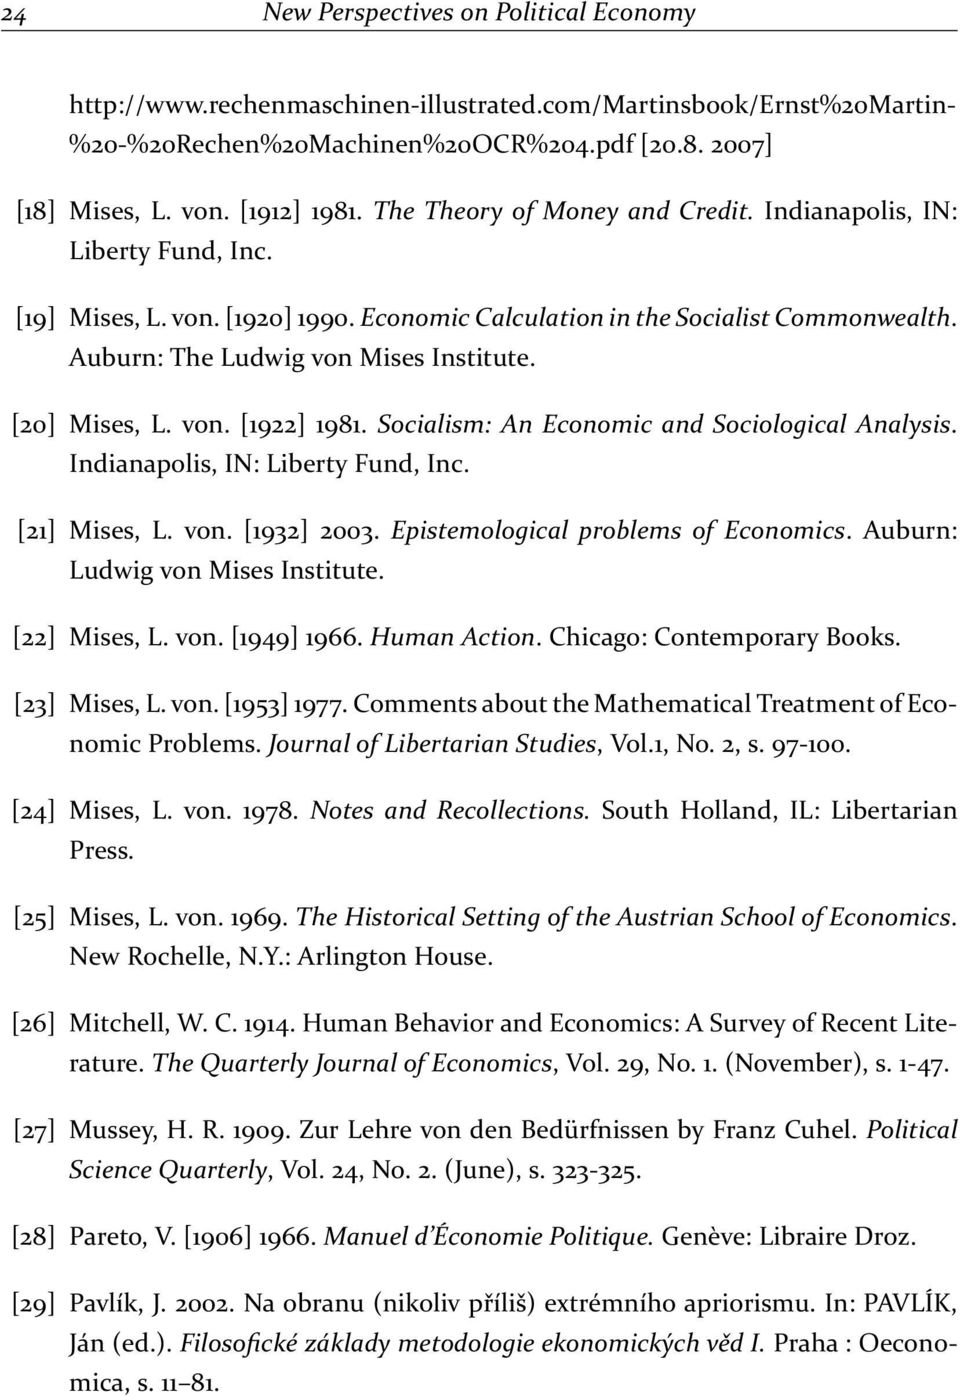 [20] Mises, L. von. [1922] 1981. Socialism: An Economic and Sociological Analysis. Indianapolis, IN: Liberty Fund, Inc. [21] Mises, L. von. [1932] 2003. Epistemological problems of Economics.